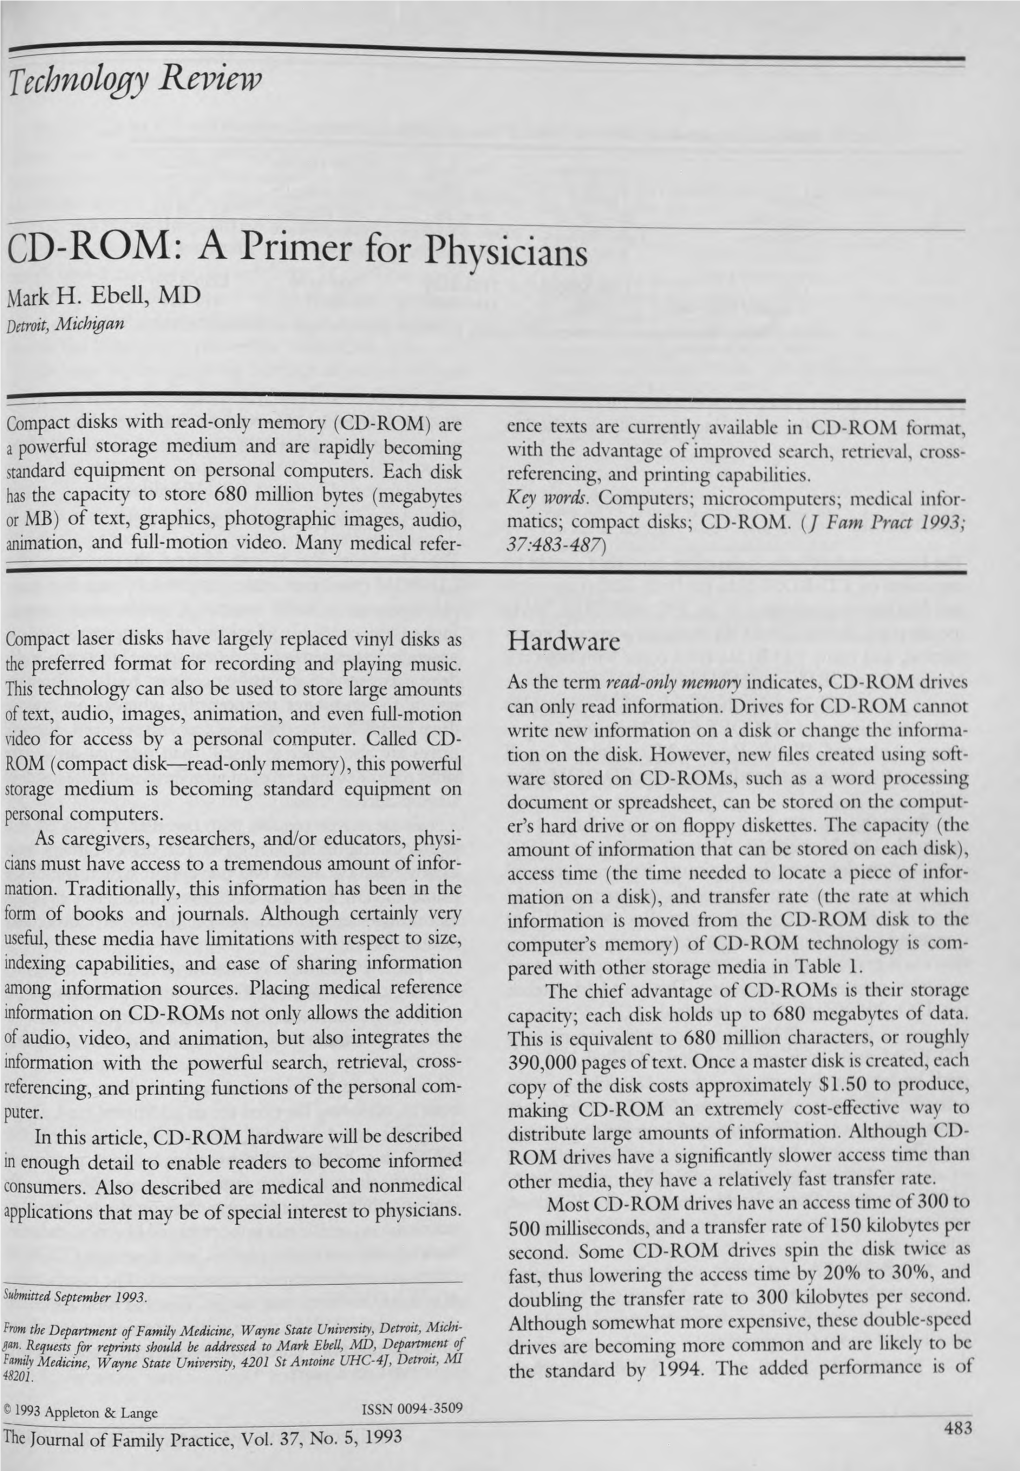 Technology Review CD-ROM: a Primer for Physicians